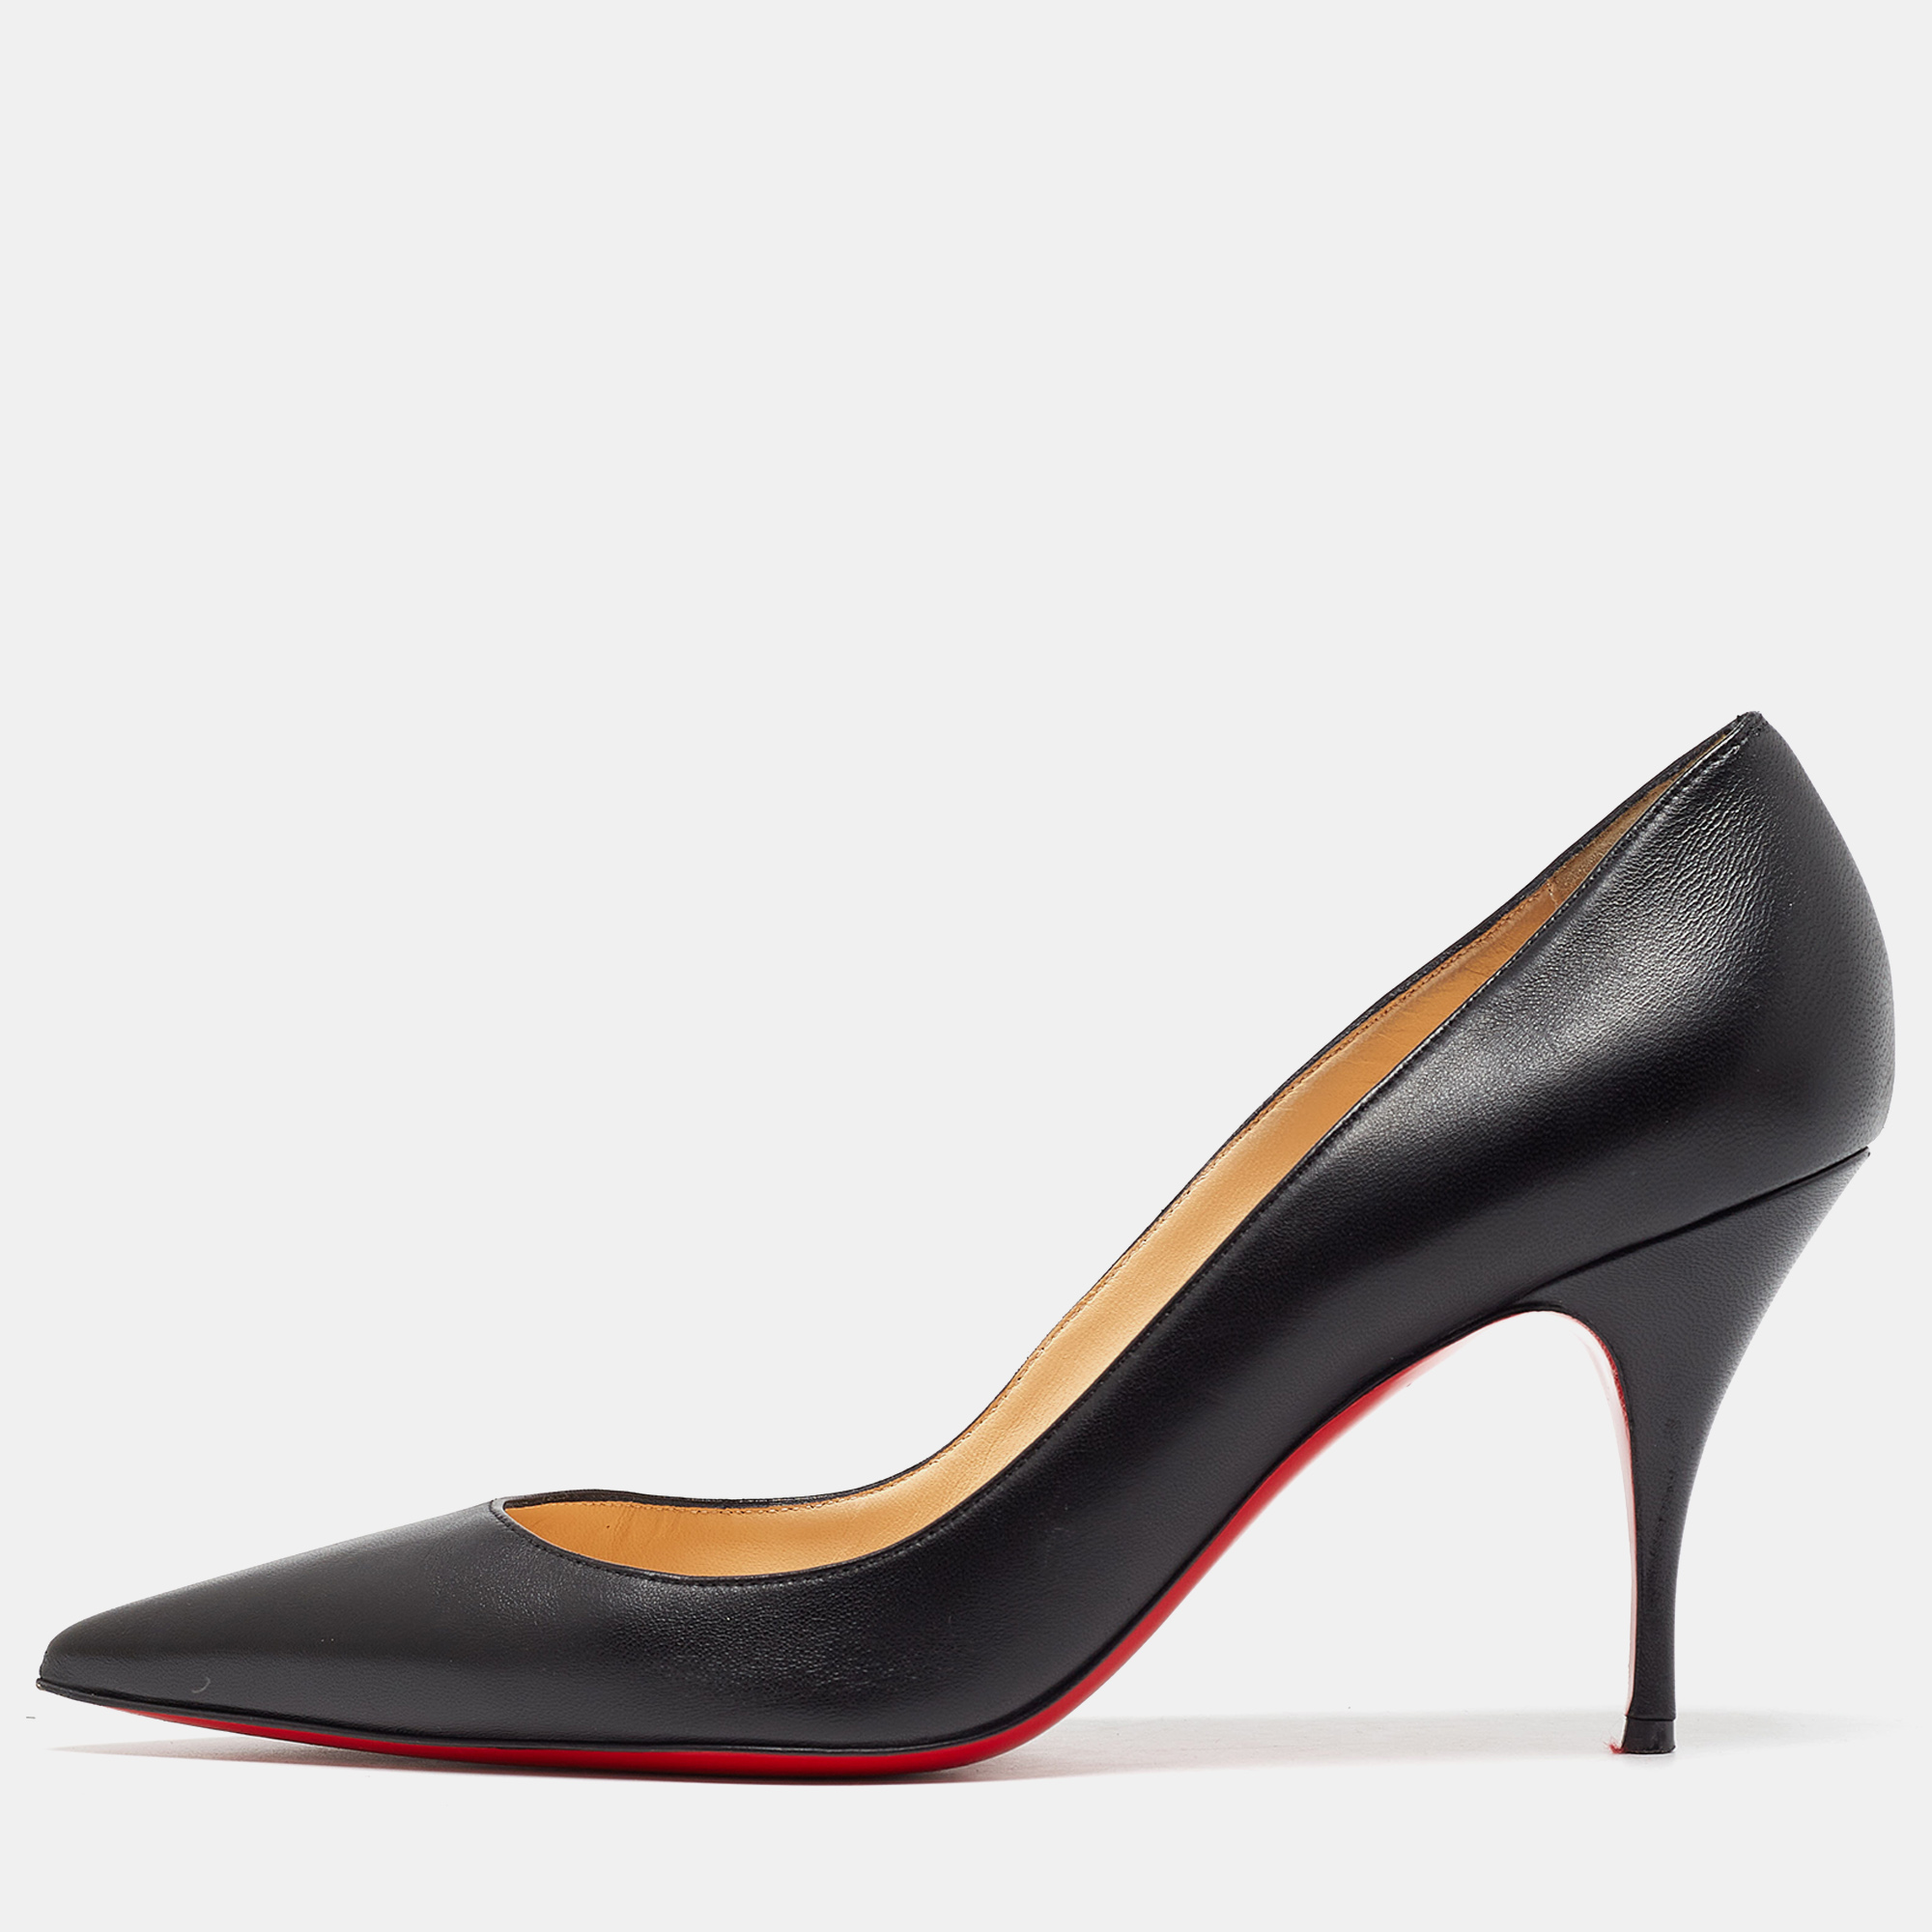 Christian louboutin black leather clare pointed toe pumps size 41